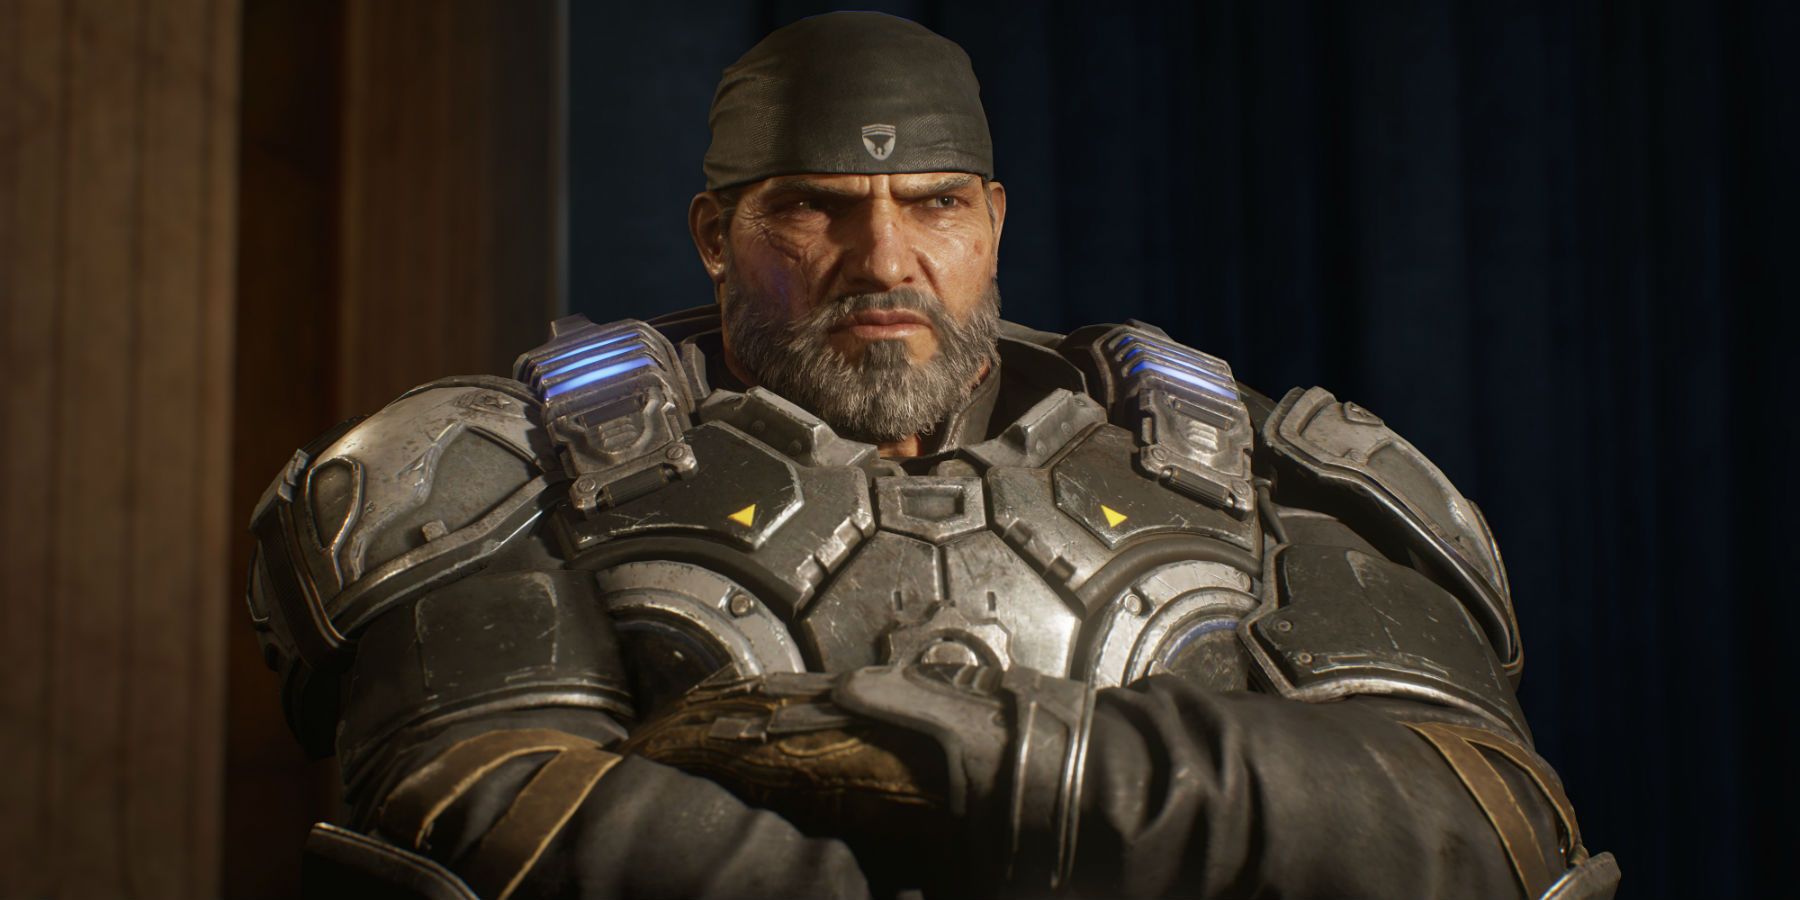 Common questions about Gears 5 release – answered!